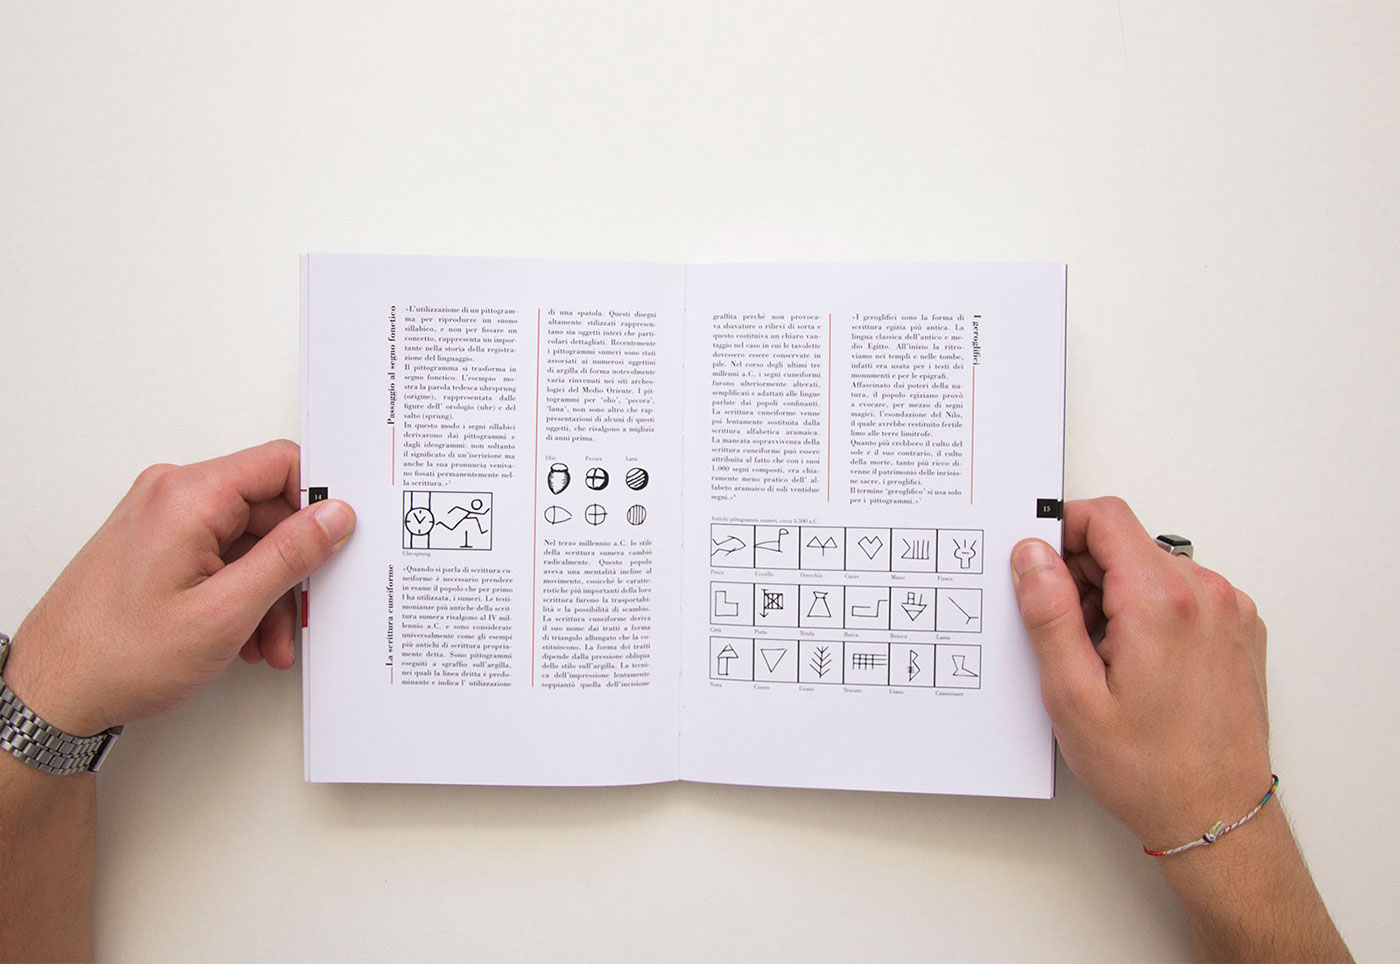 type design manual book anatomy font degree thesis technical catania accademia